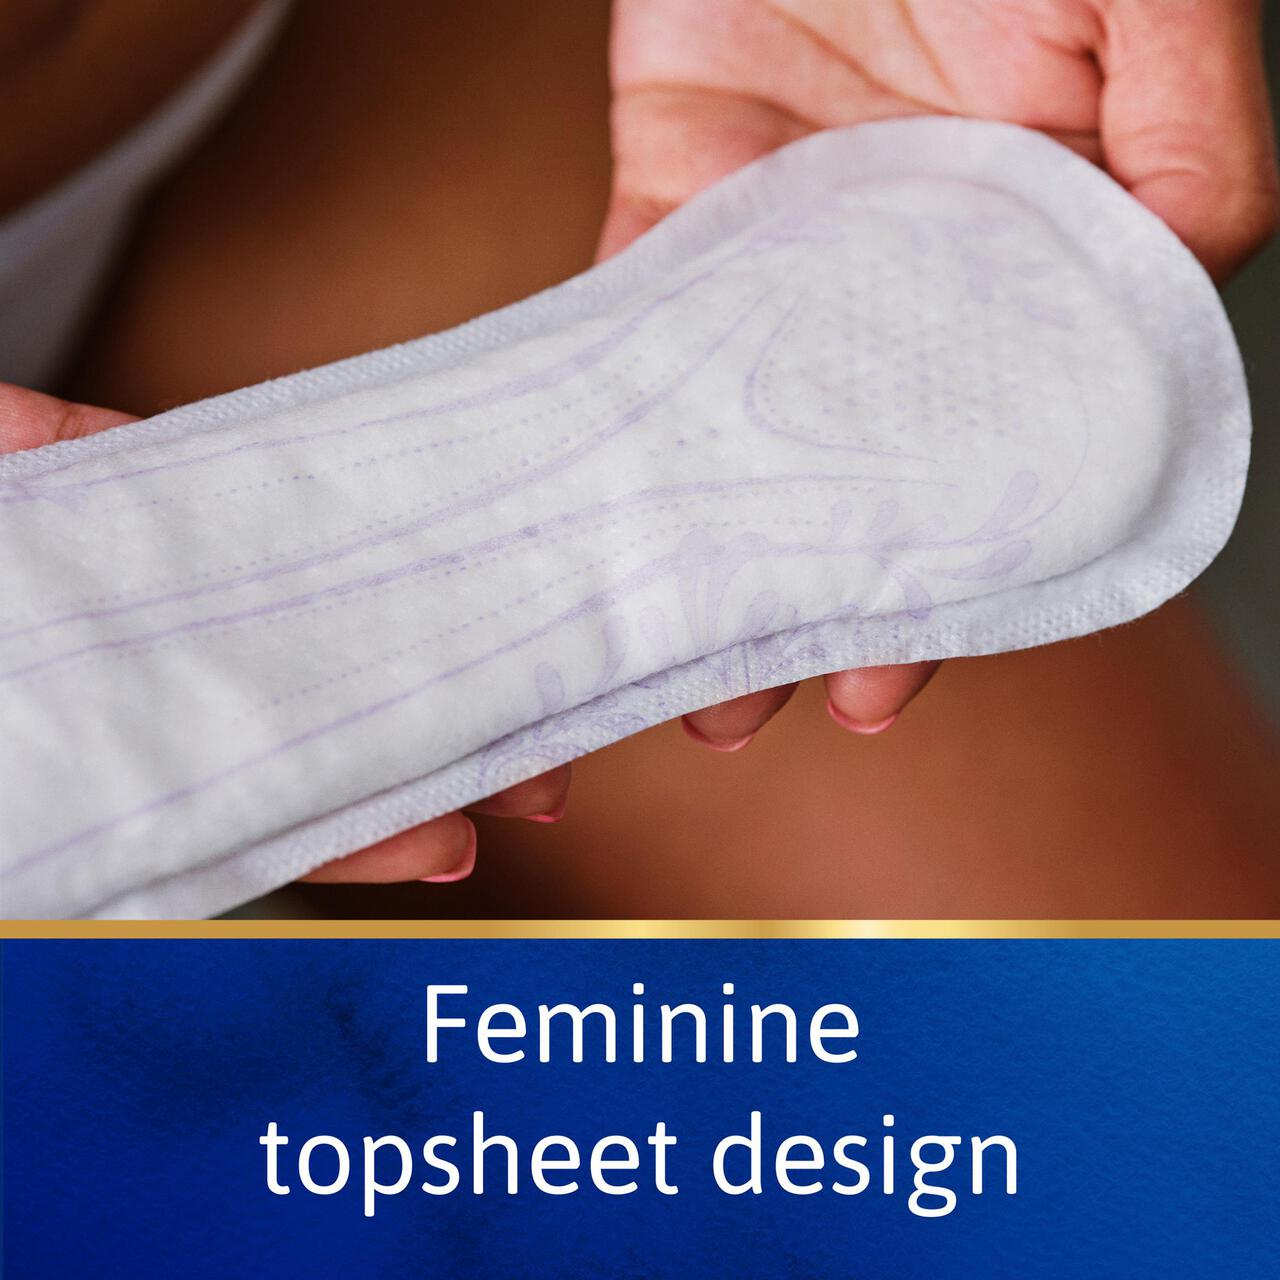 TENA Lady Discreet Incontinence Pads 16 per pack